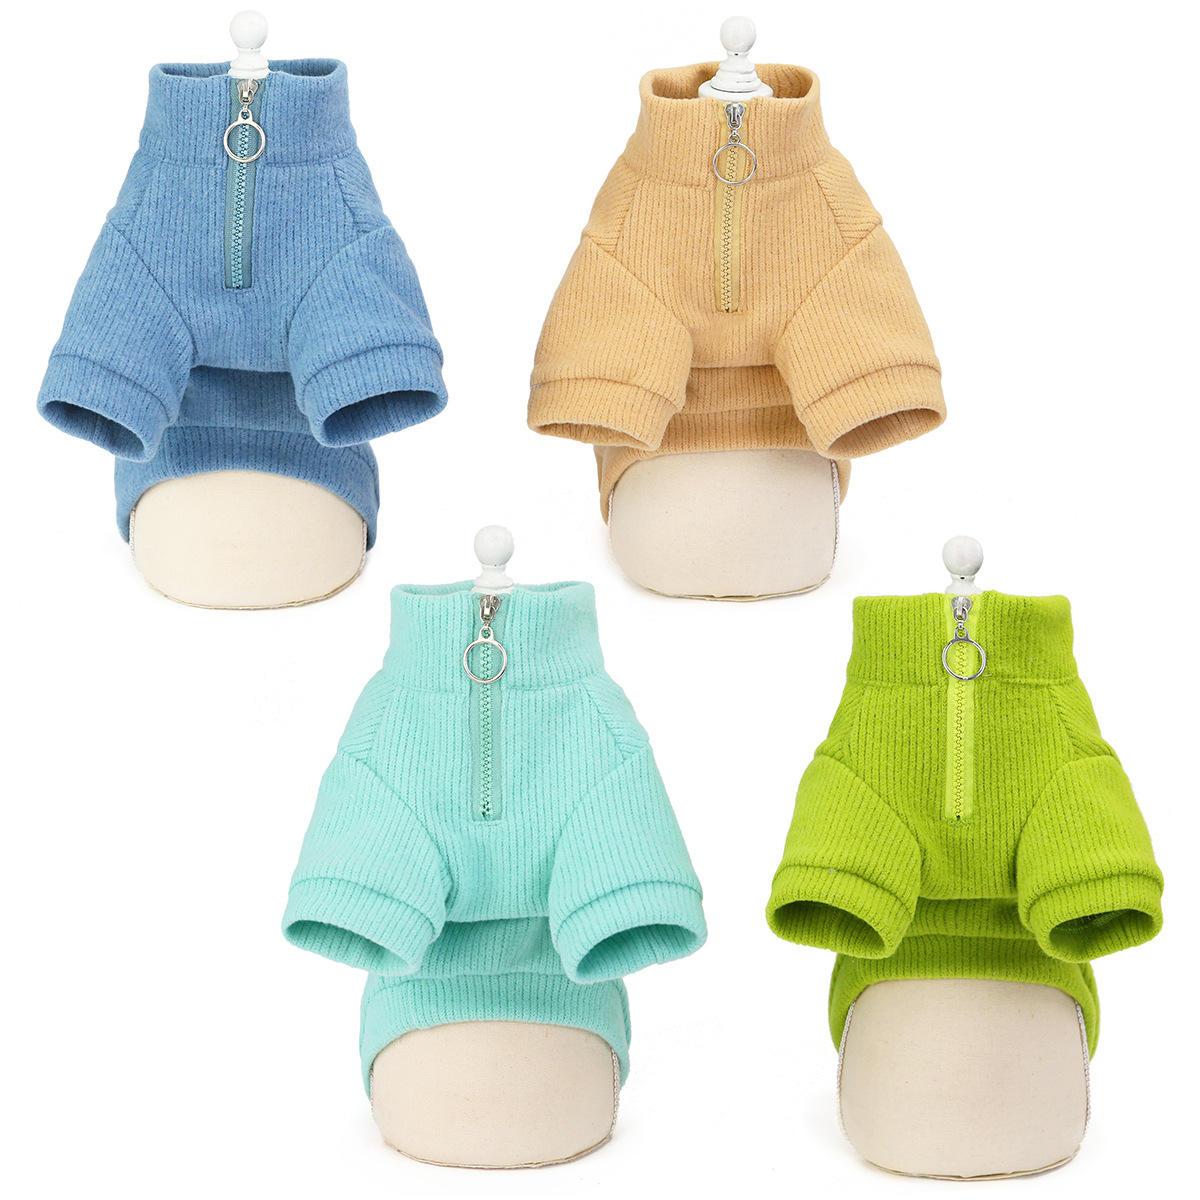 New Product Designer Dog Clothes Winter Pet Knit Jumper Dog Overall Outfit Clothing Sweater